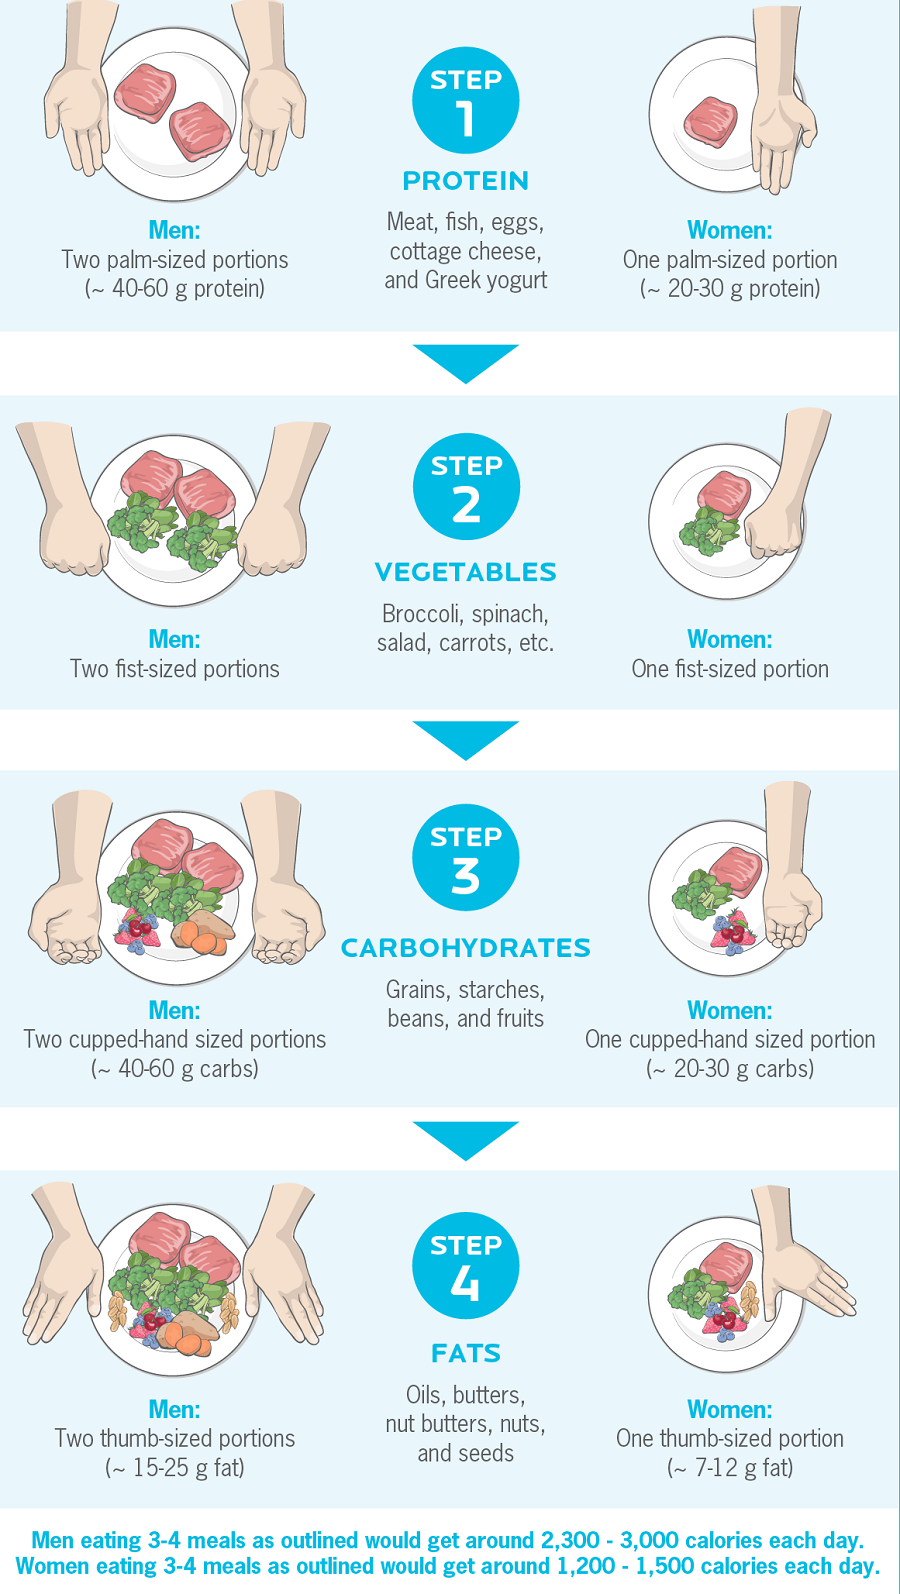 20 EASY Tips - Portion Control For Weight Loss (Without Being Hungry)